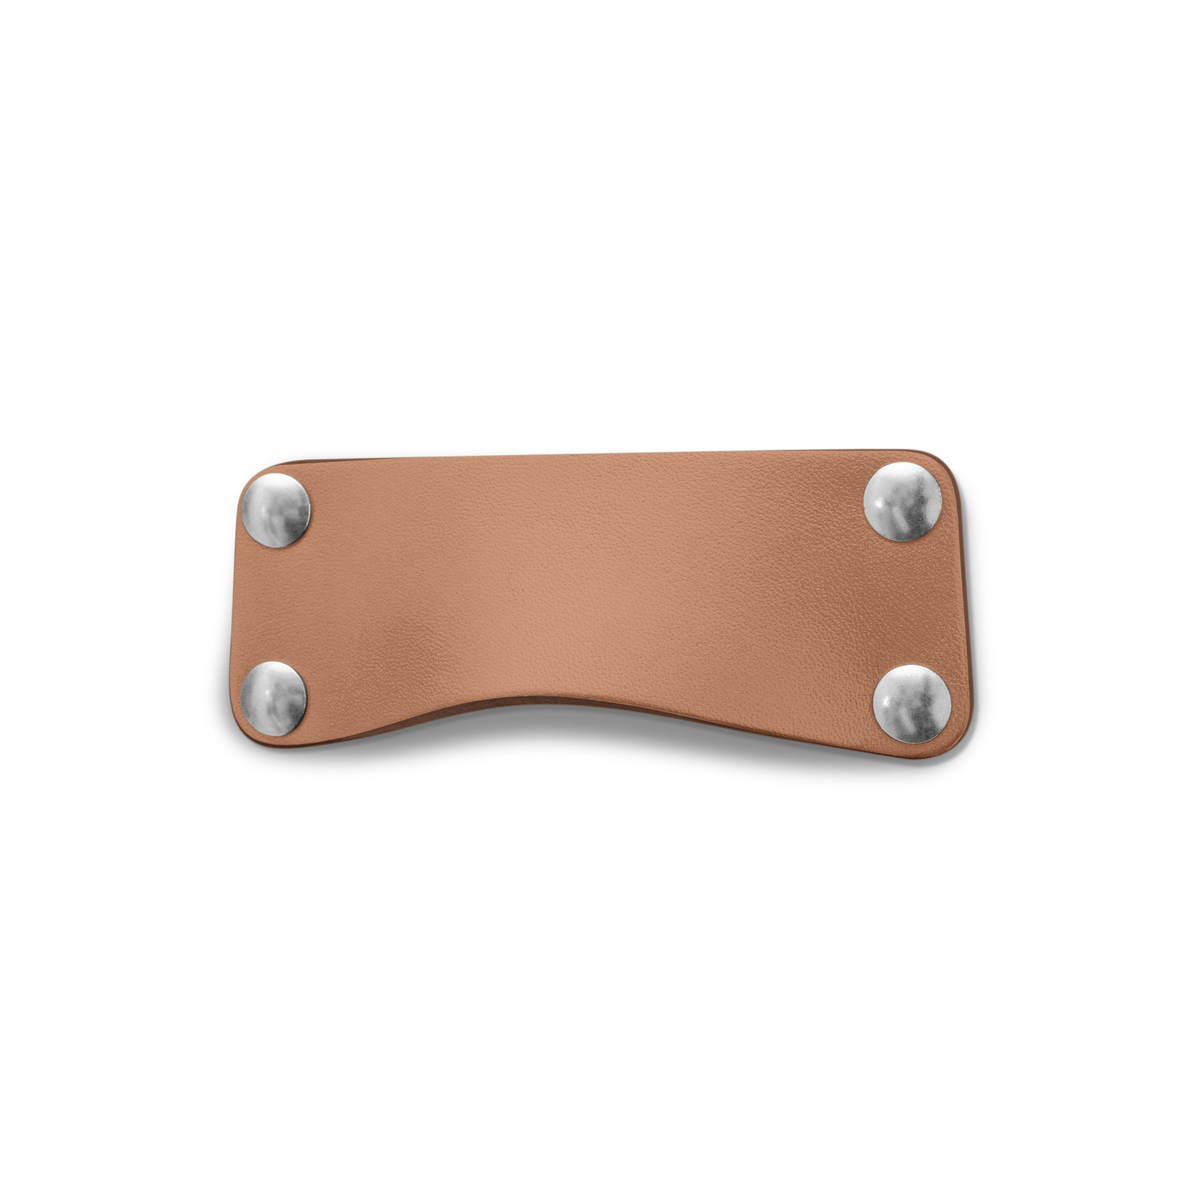 Walnut Studiolo Drawer Pulls Leather Bin Pull - The Morrison variant natural leather (camel) with nickel hardware